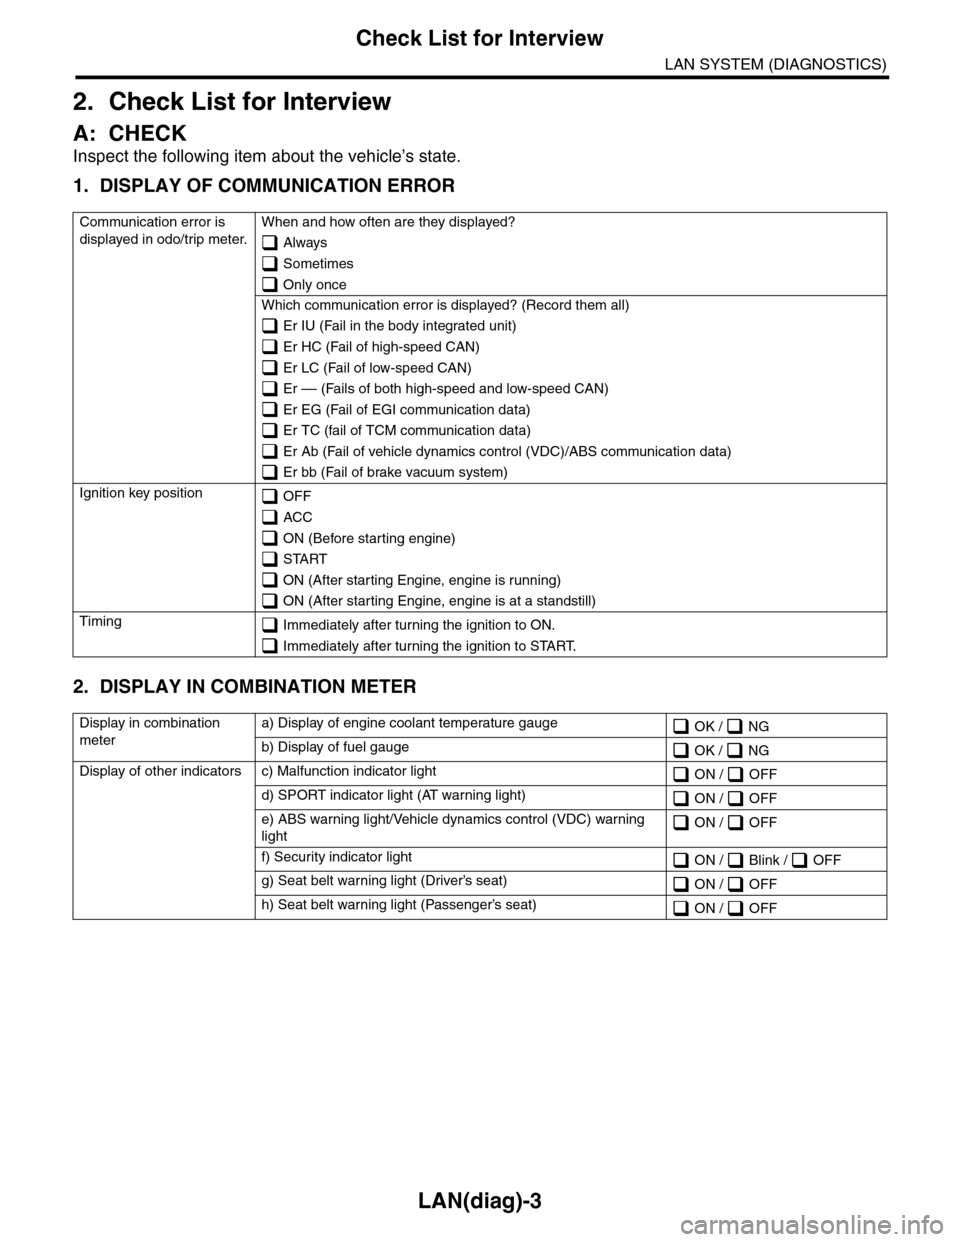 SUBARU TRIBECA 2009 1.G Service Workshop Manual LAN(diag)-3
Check List for Interview
LAN SYSTEM (DIAGNOSTICS)
2. Check List for Interview
A: CHECK
Inspect the following item about the vehicle’s state.
1. DISPLAY OF COMMUNICATION ERROR
2. DISPLAY 